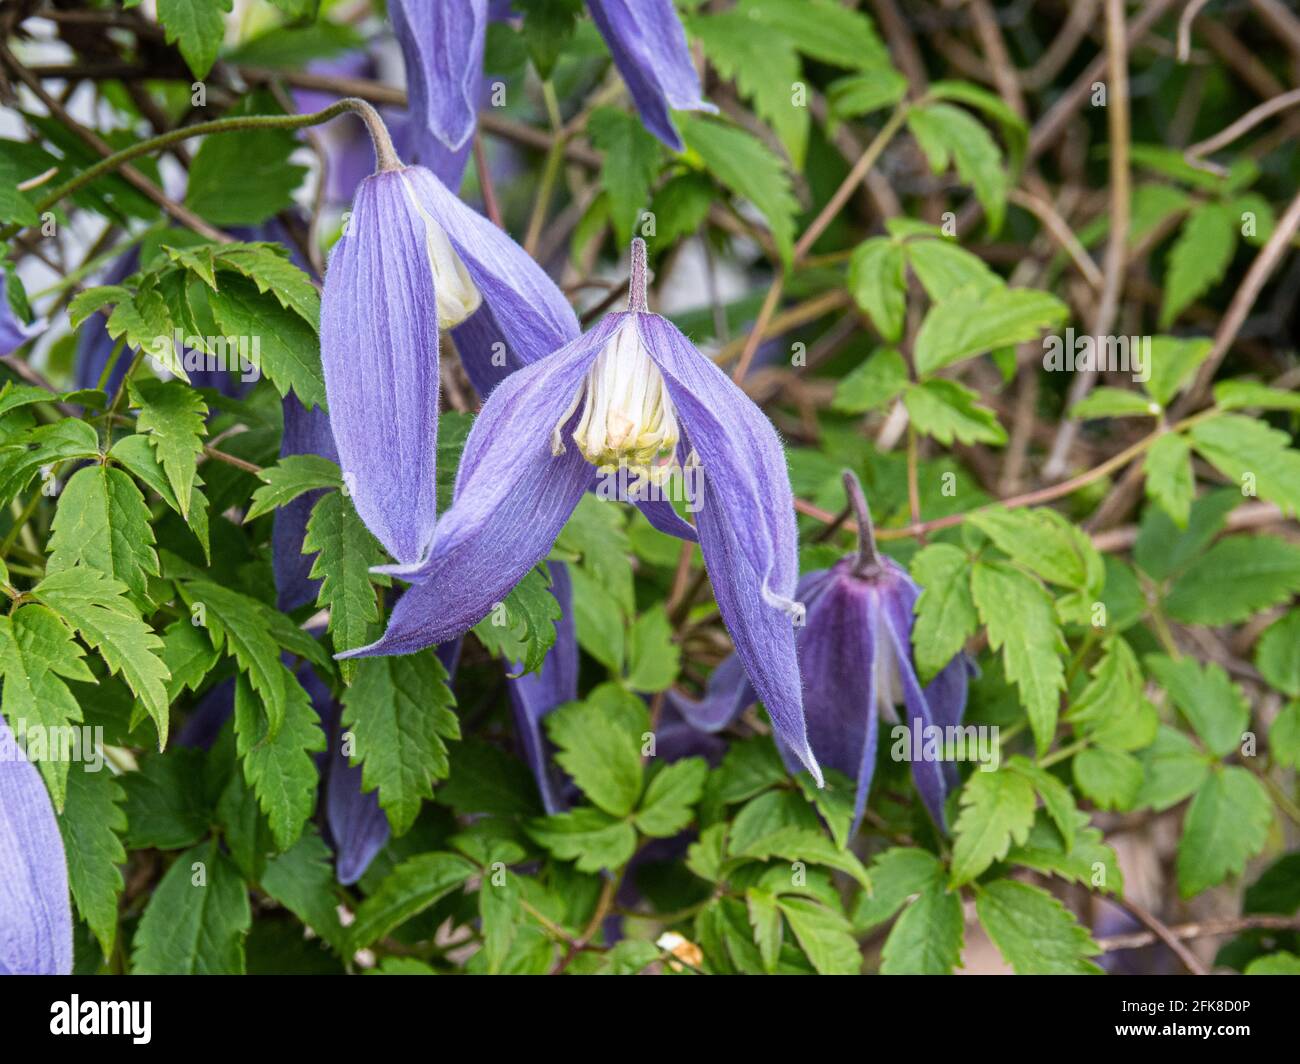 A close up of the dainty hanging blue flowers of Clematis alpina Blue Dancer Stock Photo